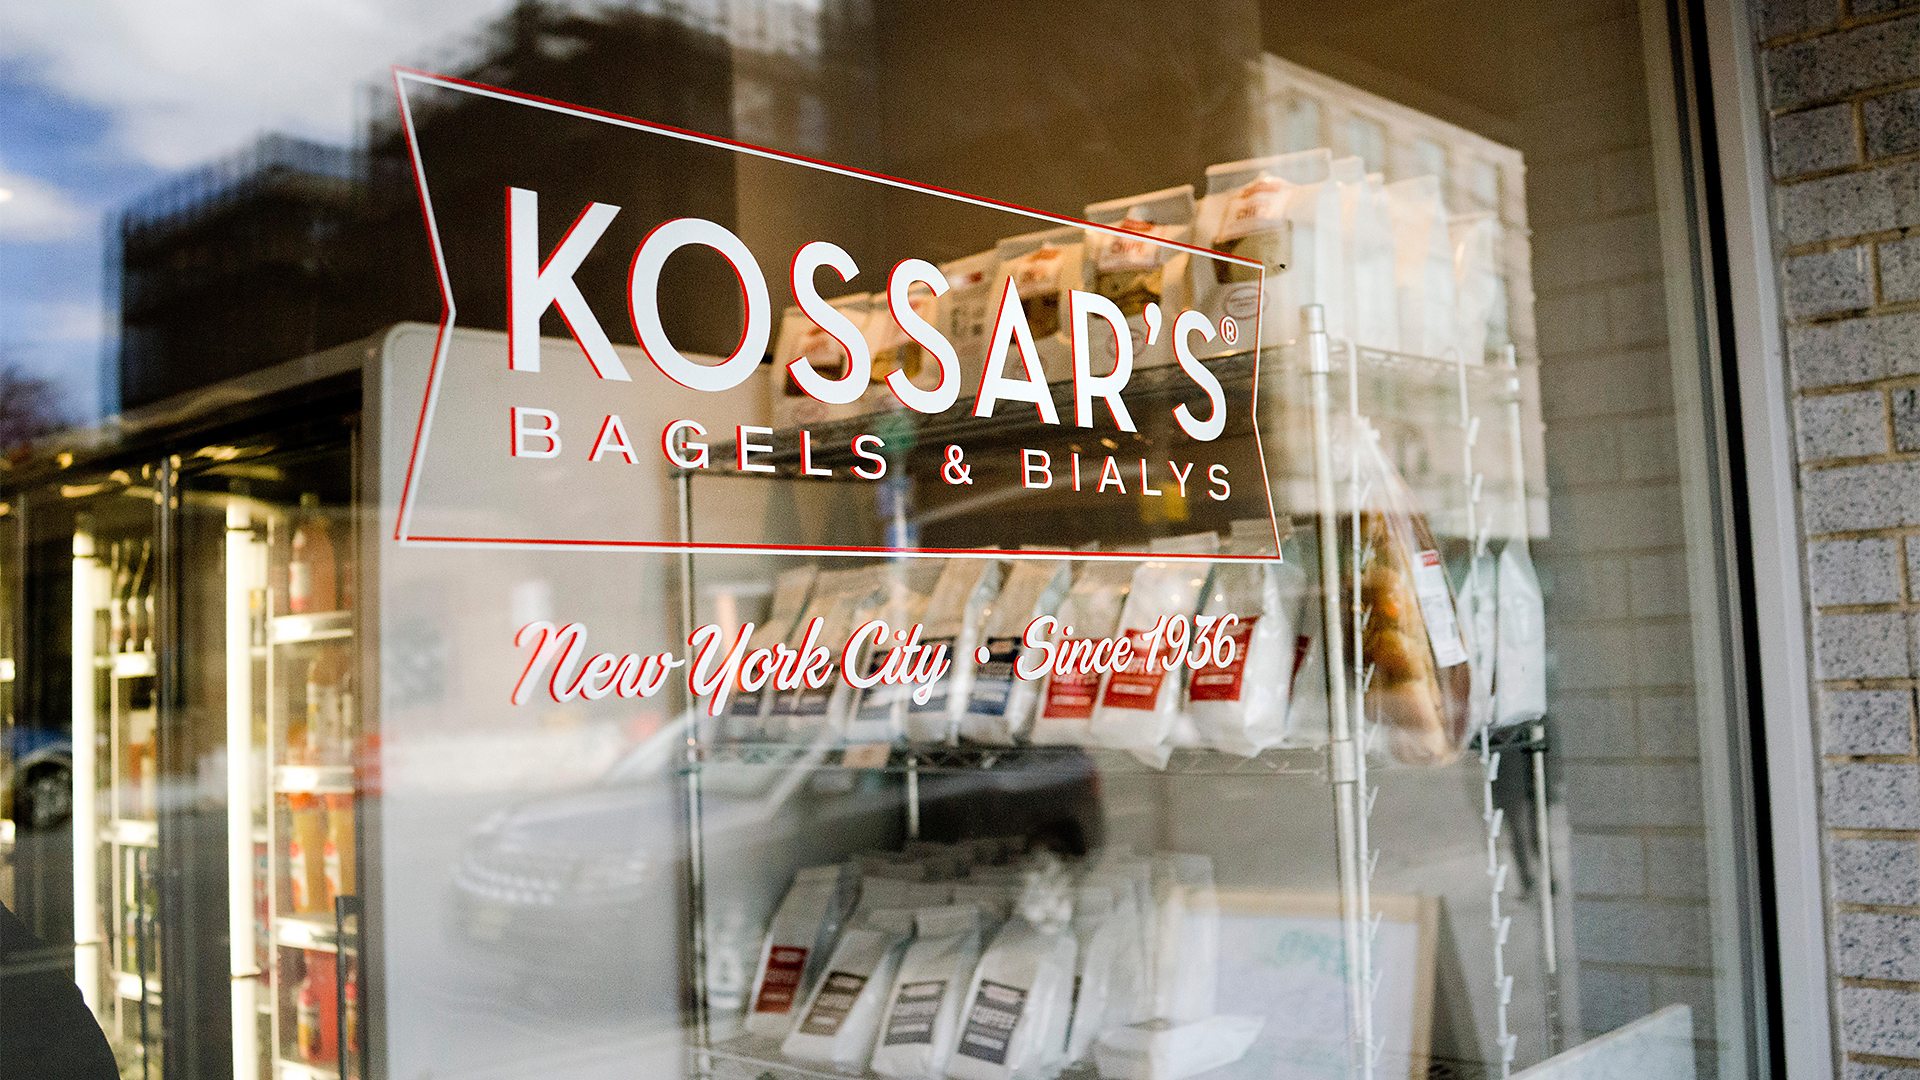 The window of Kossar's Bagels and Bialys